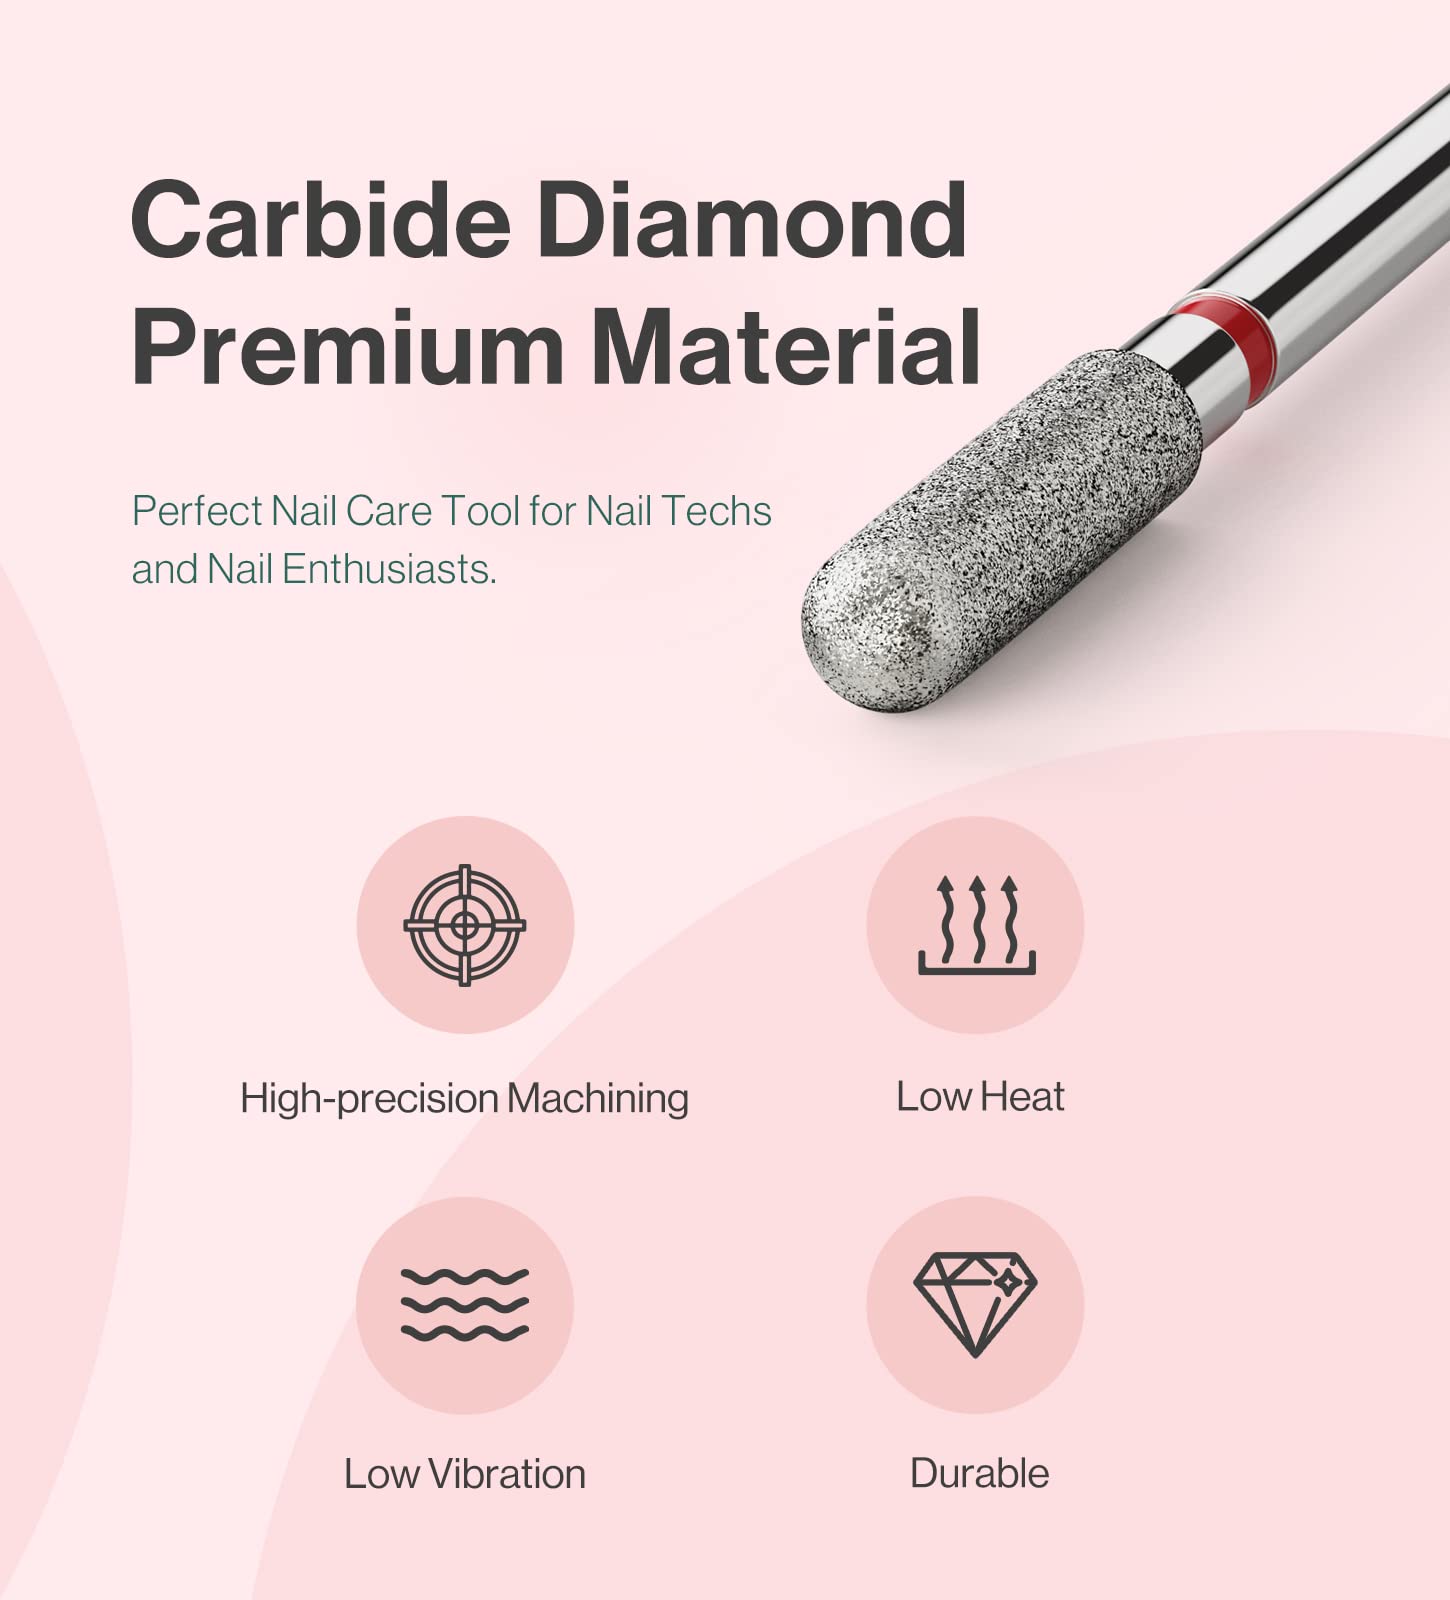 3mm Rounded Top Barrel Carbide Diamond Under Nail Cleaner Nail Drill Bit